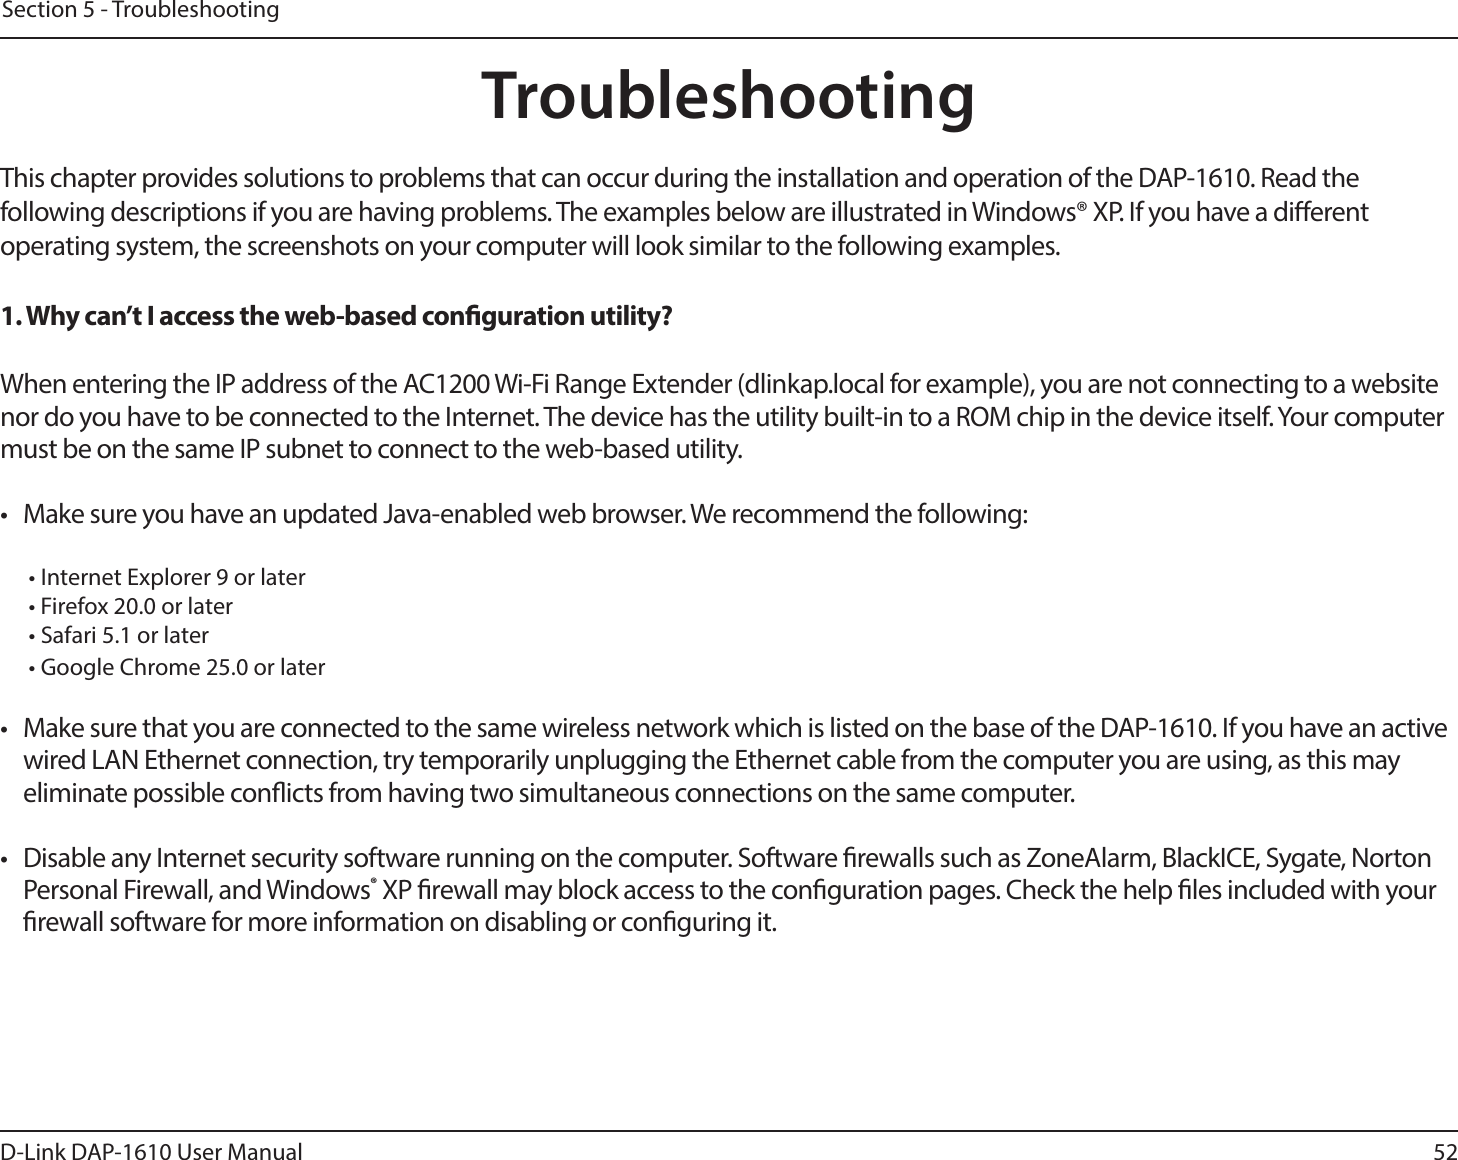 52D-Link DAP-1610 User ManualSection 5 - TroubleshootingTroubleshootingThis chapter provides solutions to problems that can occur during the installation and operation of the DAP-1610. Read the following descriptions if you are having problems. The examples below are illustrated in Windows® XP. If you have a dierent operating system, the screenshots on your computer will look similar to the following examples.1. Why can’t I access the web-based conguration utility?When entering the IP address of the AC1200 Wi-Fi Range Extender (dlinkap.local for example), you are not connecting to a website nor do you have to be connected to the Internet. The device has the utility built-in to a ROM chip in the device itself. Your computer must be on the same IP subnet to connect to the web-based utility. •  Make sure you have an updated Java-enabled web browser. We recommend the following:  • Internet Explorer 9 or later• Firefox 20.0 or later• Safari 5.1 or later• Google Chrome 25.0 or later•  Make sure that you are connected to the same wireless network which is listed on the base of the DAP-1610. If you have an active wired LAN Ethernet connection, try temporarily unplugging the Ethernet cable from the computer you are using, as this may eliminate possible conicts from having two simultaneous connections on the same computer. •  Disable any Internet security software running on the computer. Software rewalls such as ZoneAlarm, BlackICE, Sygate, Norton Personal Firewall, and Windows® XP rewall may block access to the conguration pages. Check the help les included with your rewall software for more information on disabling or conguring it.